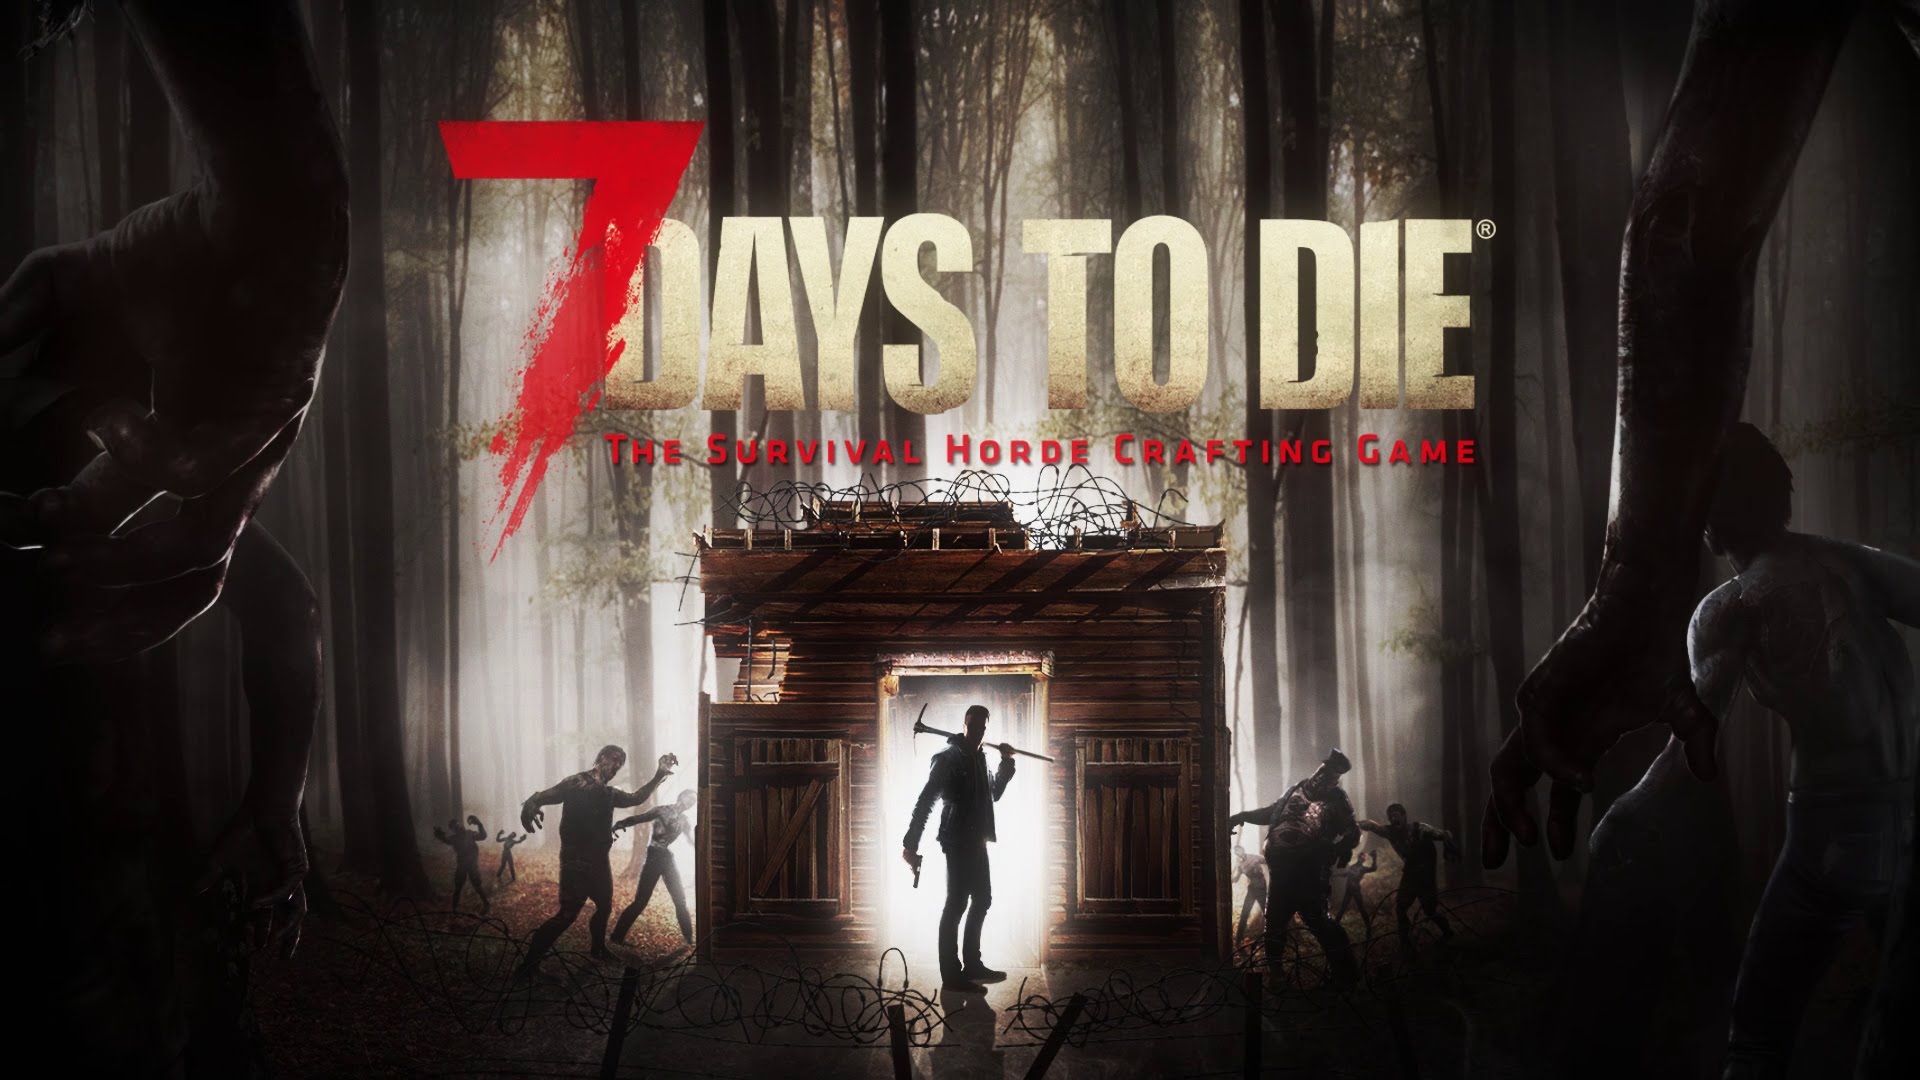 HD wallpaper Video Game 7 Days to die  Wallpaper Flare